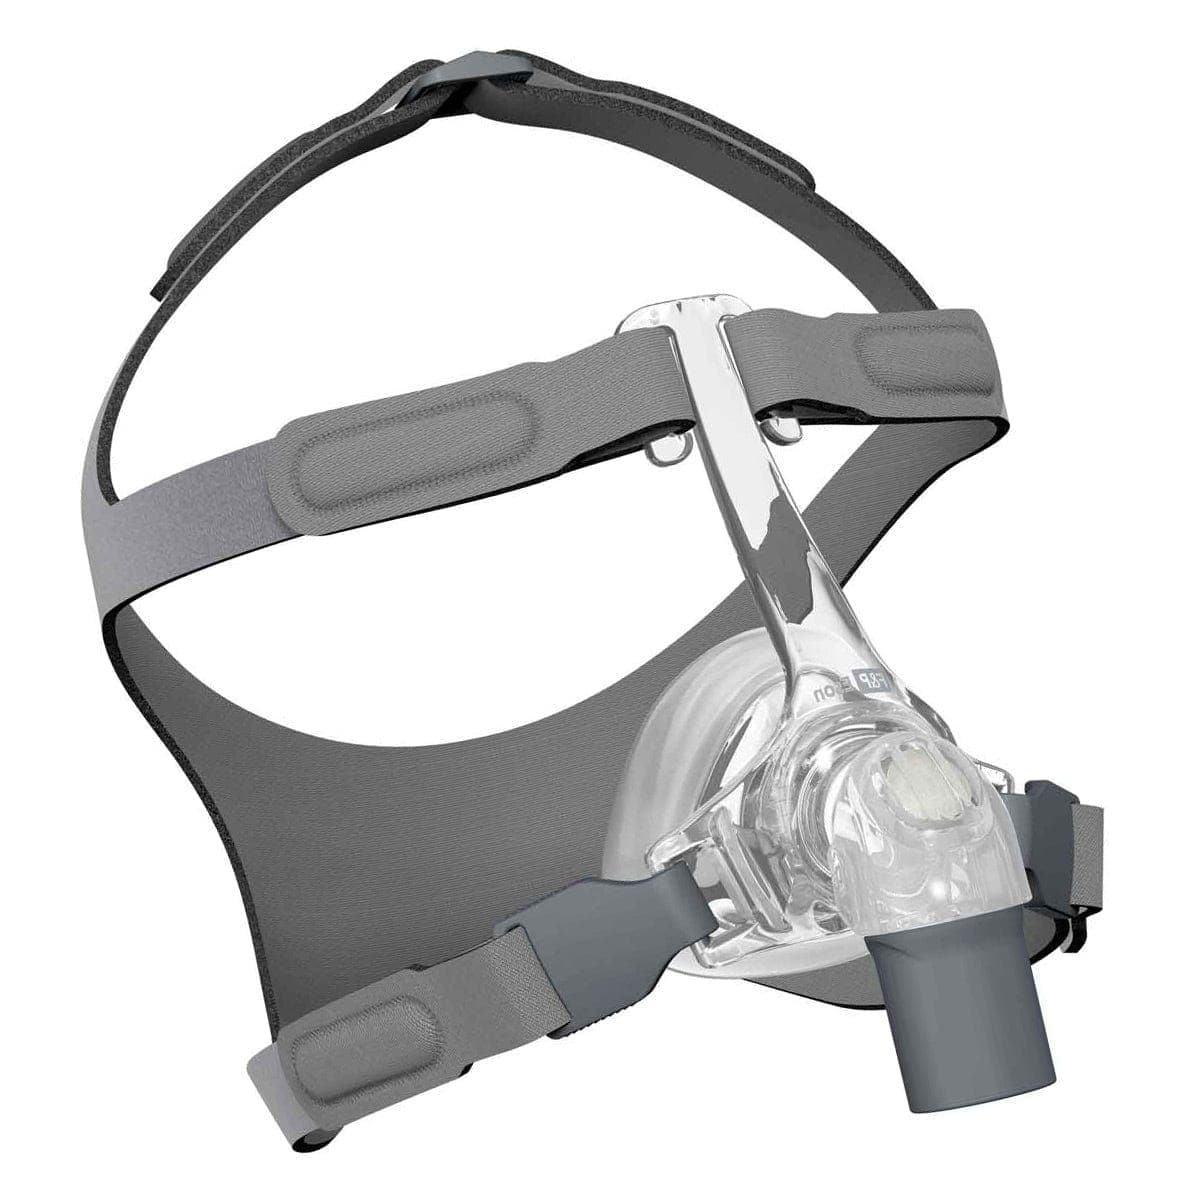 Compass Health Compass Health Fisher & Paykel Eson Nasal CPAP Mask, Medium 400450